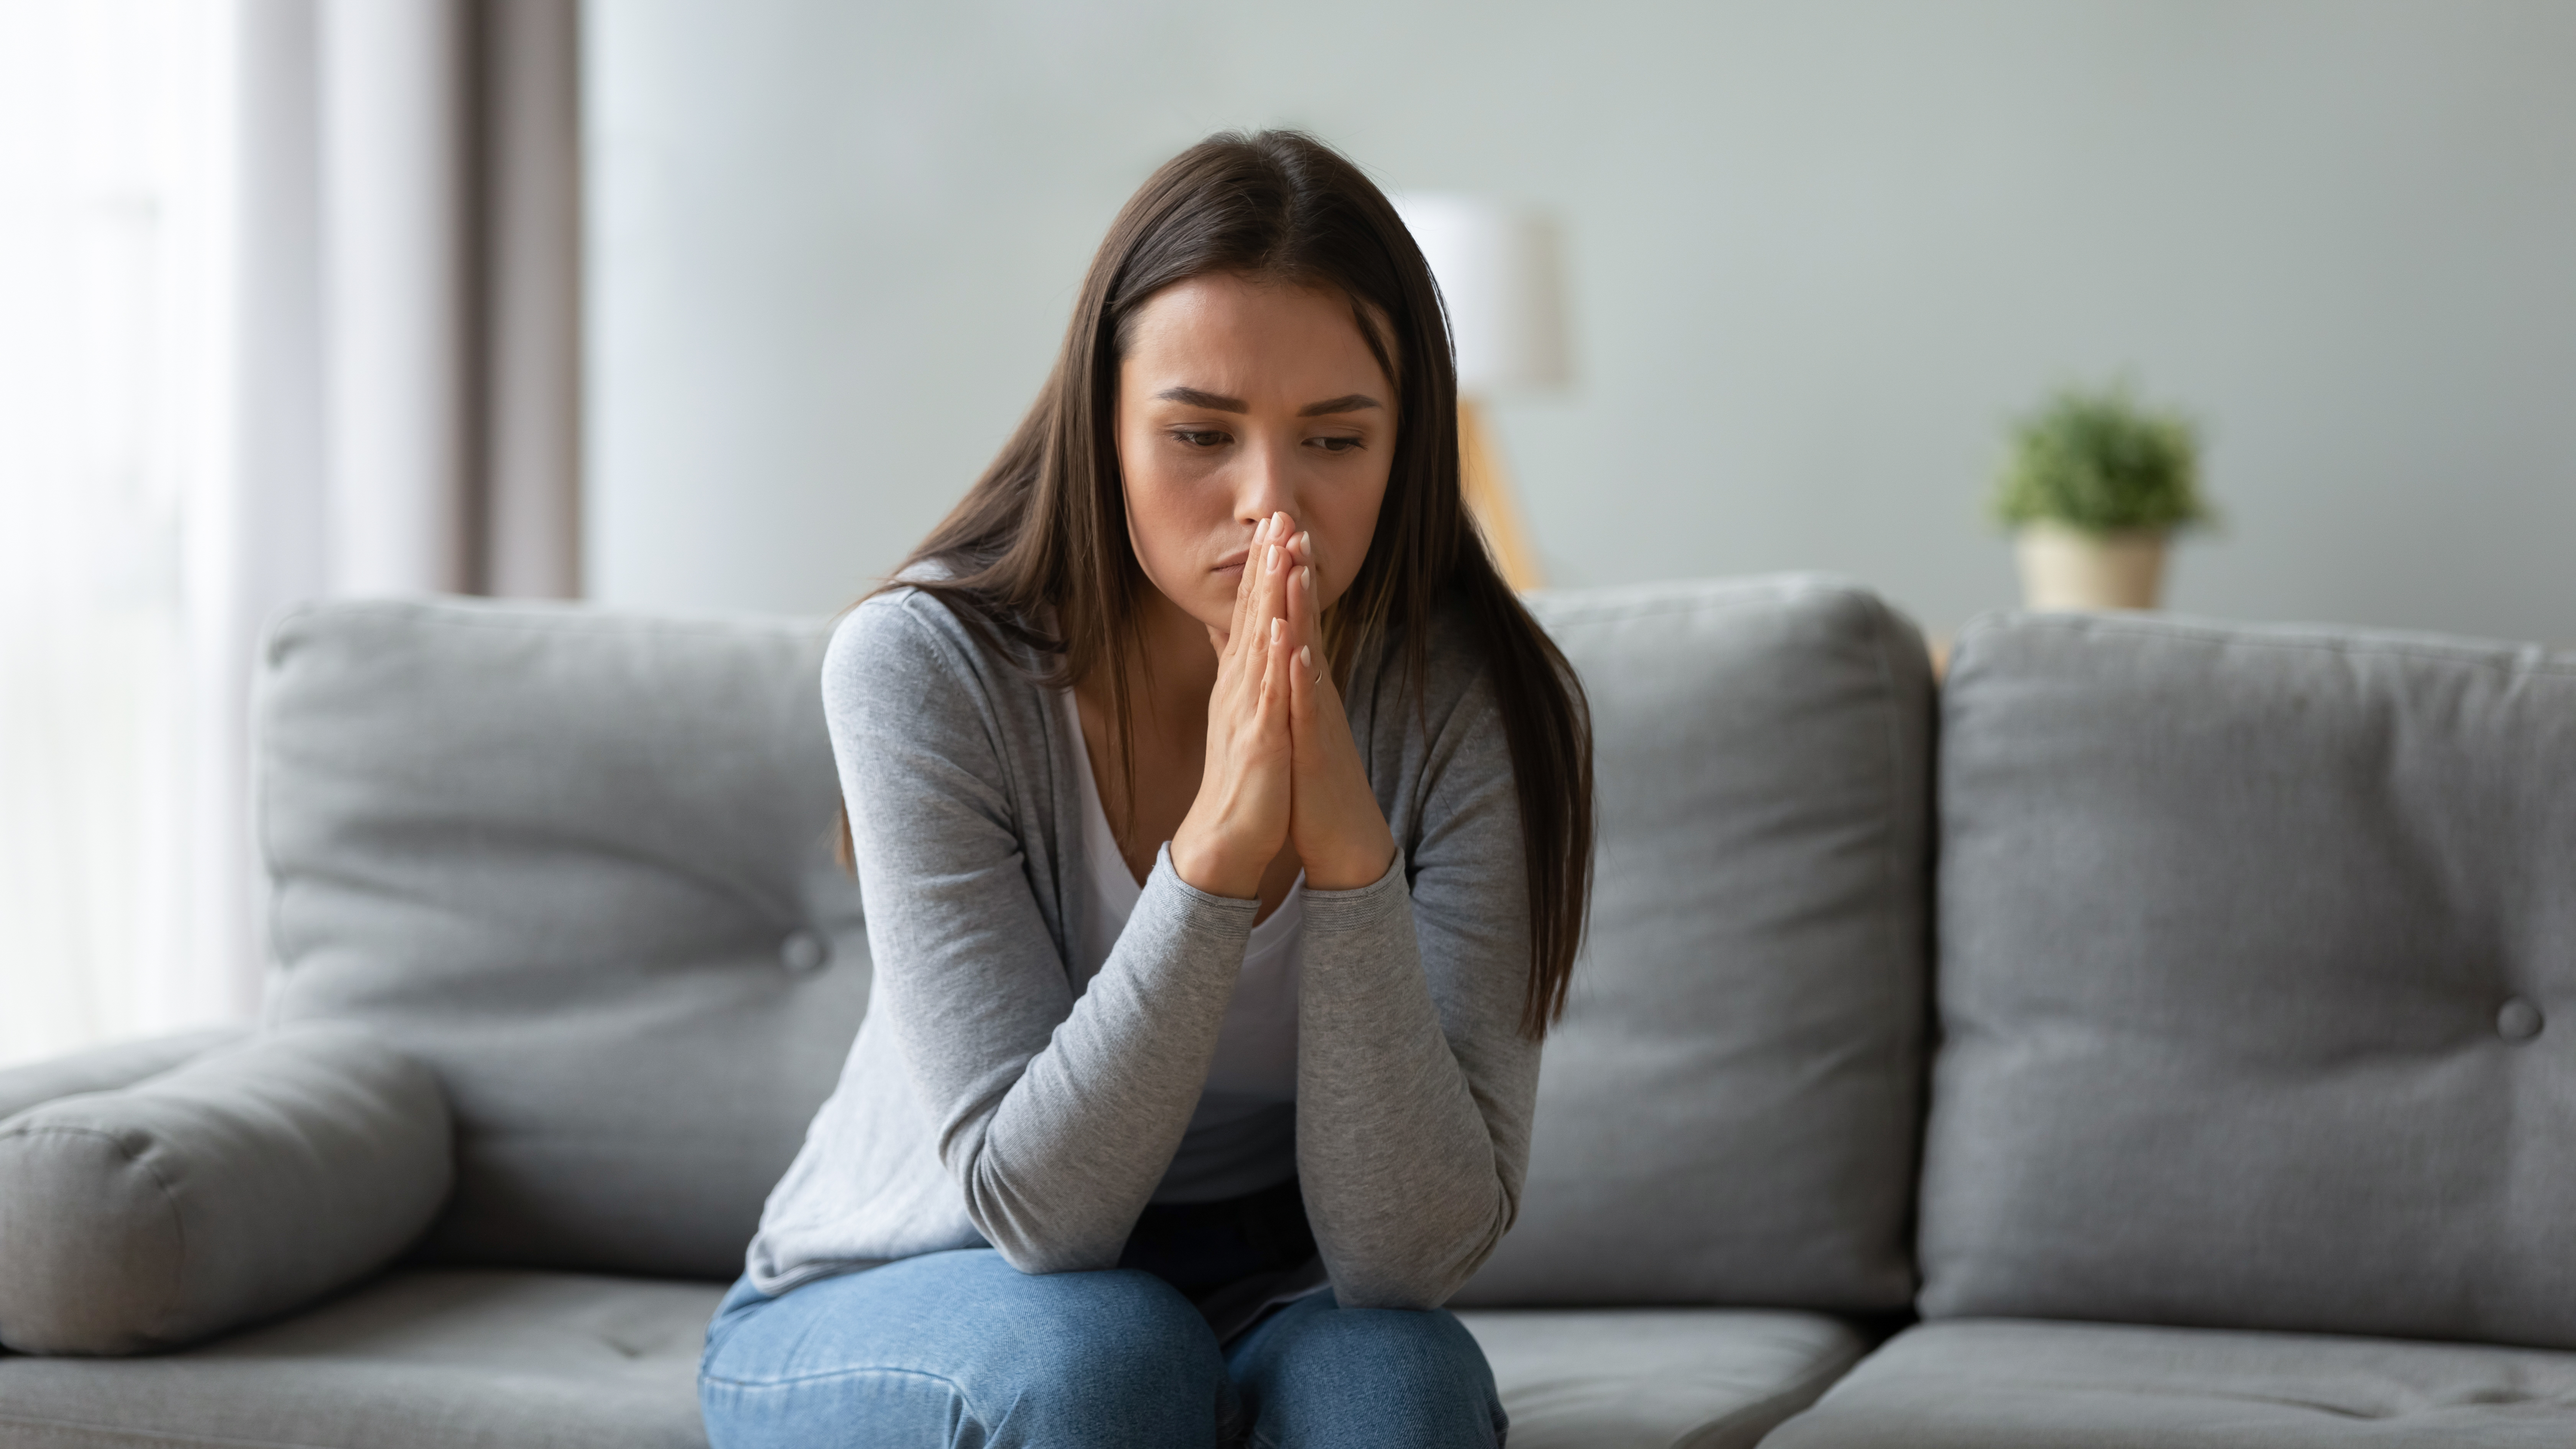 A distraught woman sitting on the sofa | Source: Shutterstock